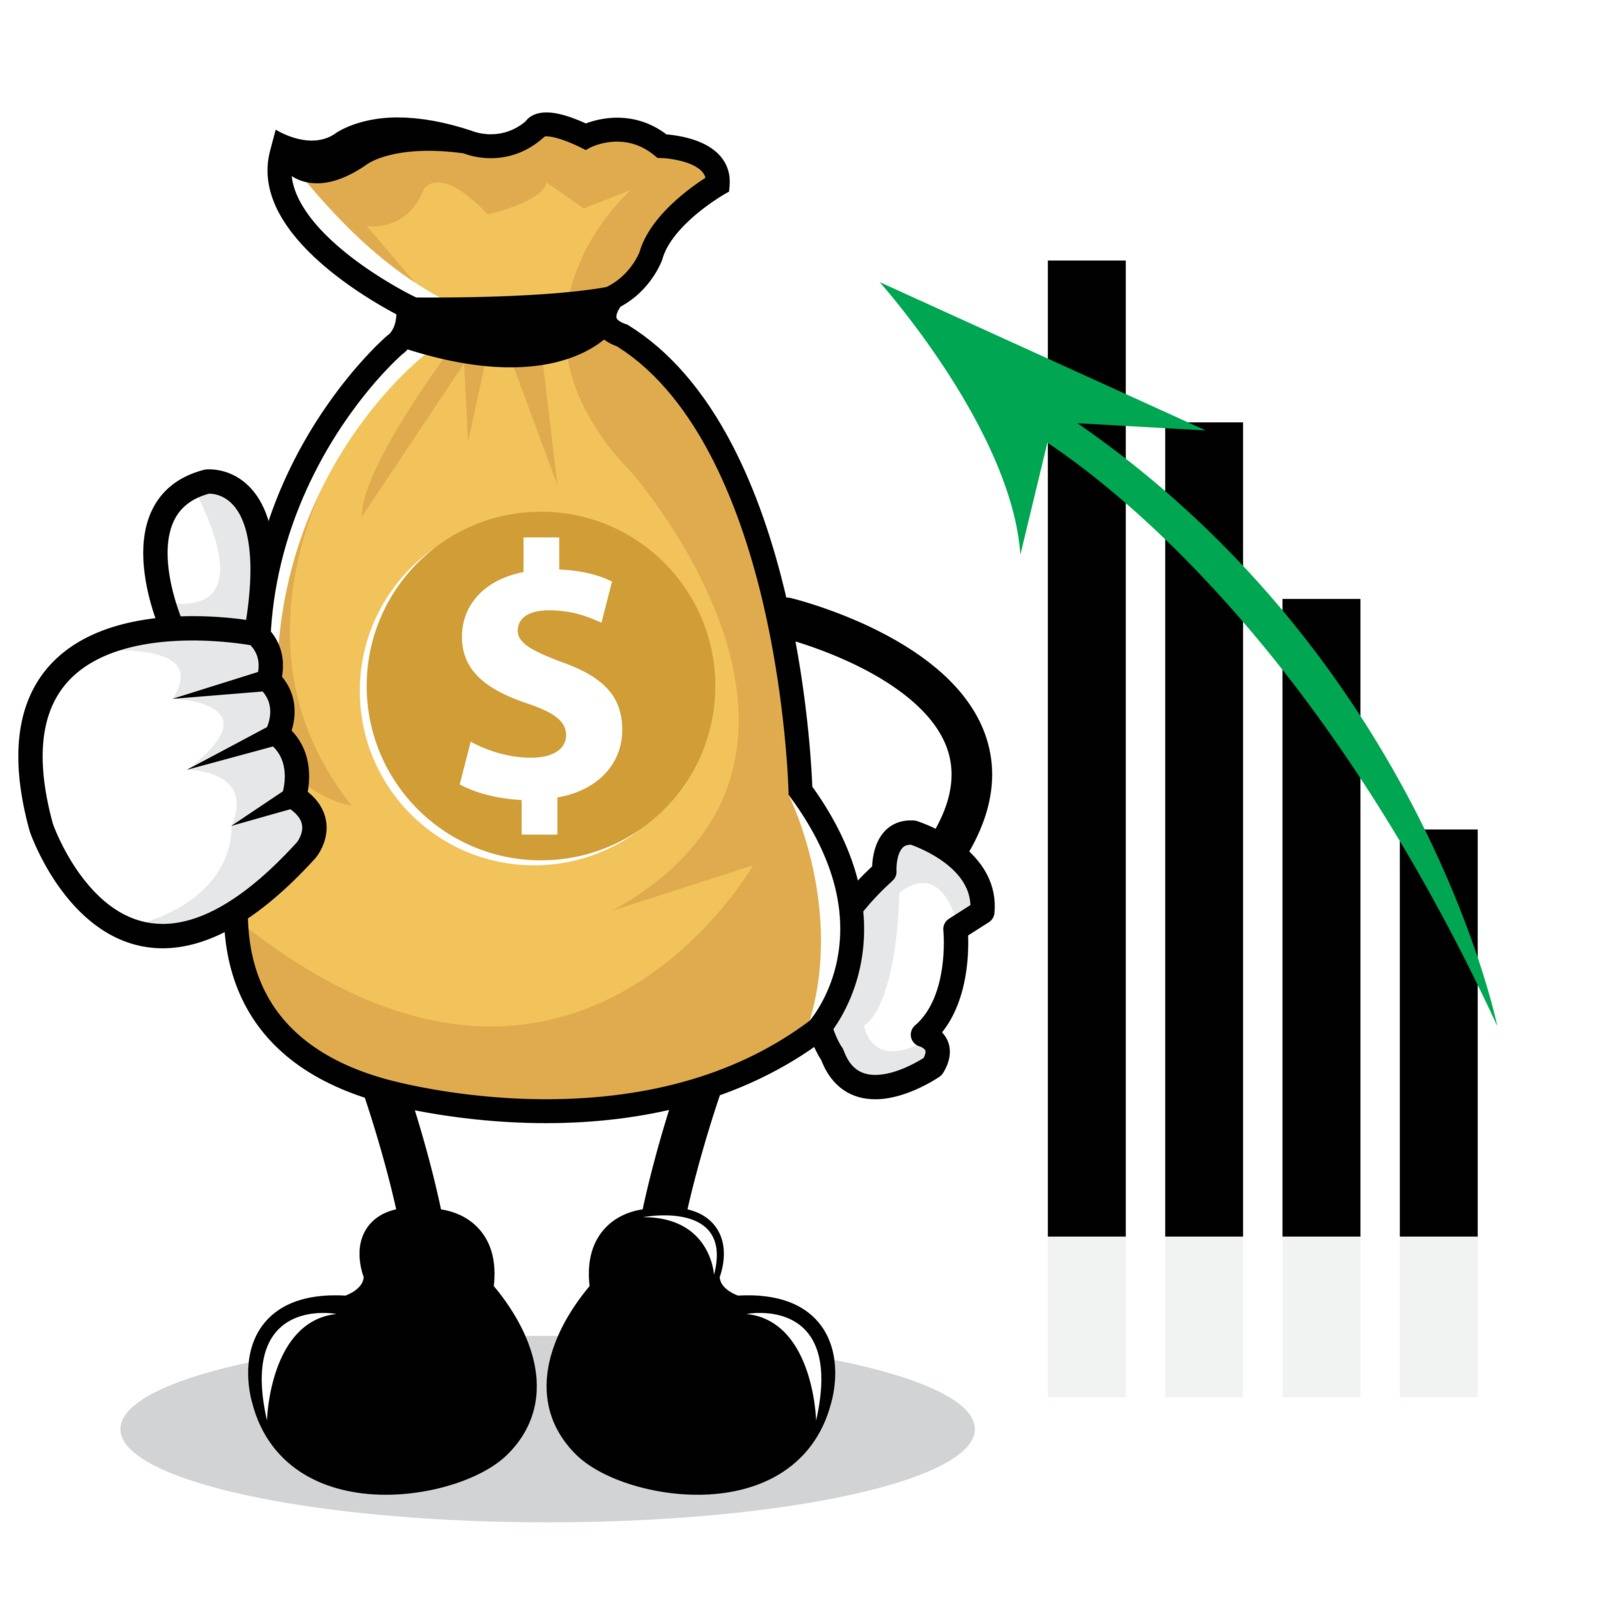 Illustration of Increased Profits with Money Bag Character on White Background